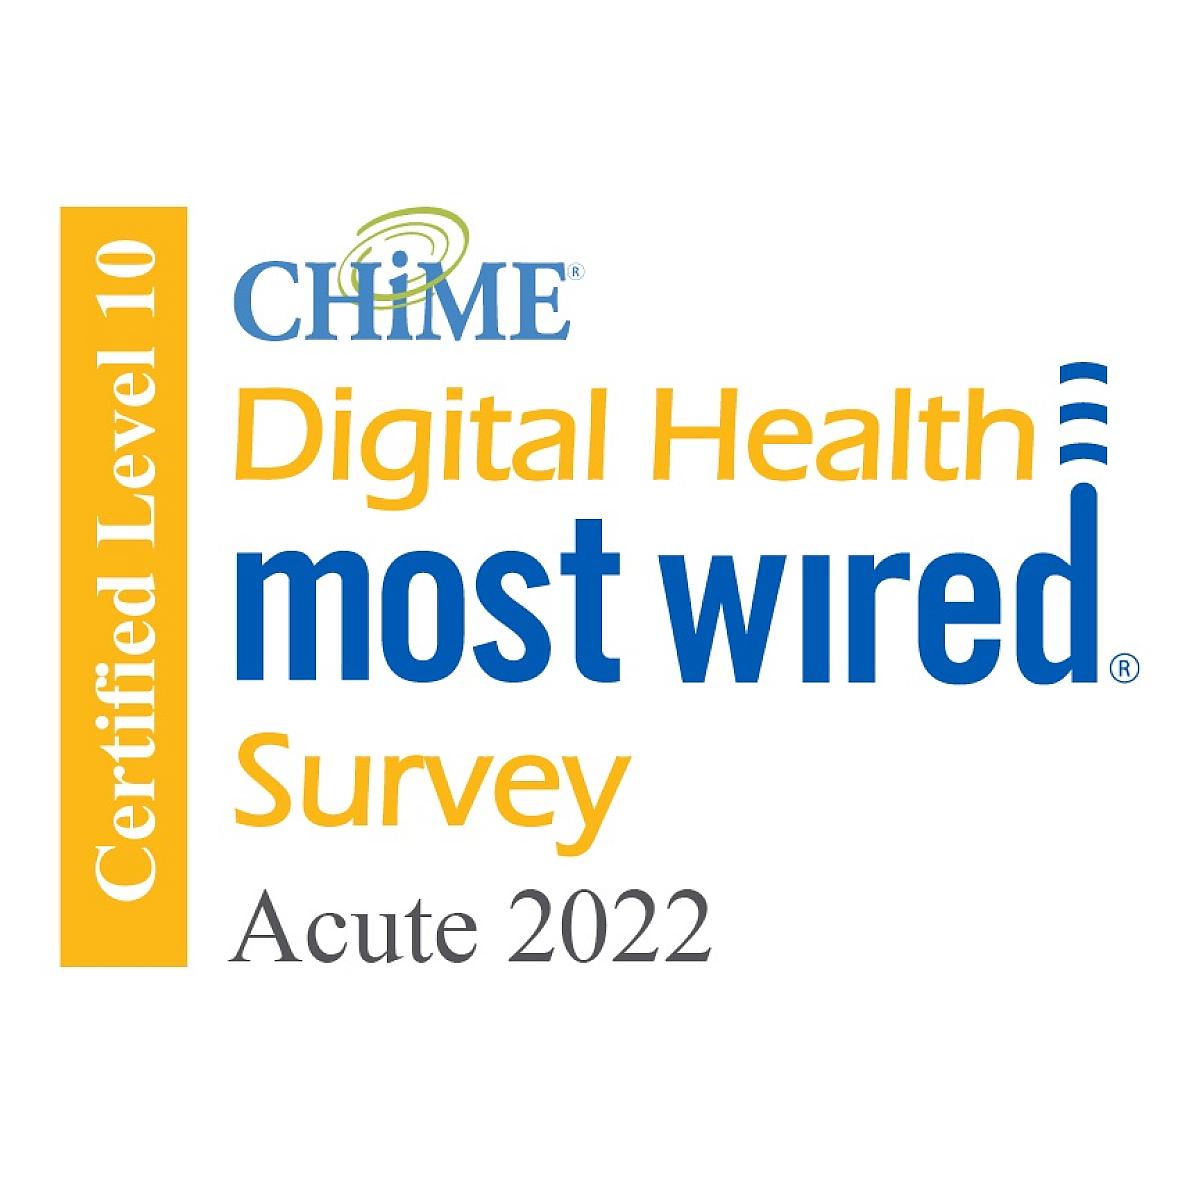 Digital Health Most Wired Survey for Acute Care in 2022 badge